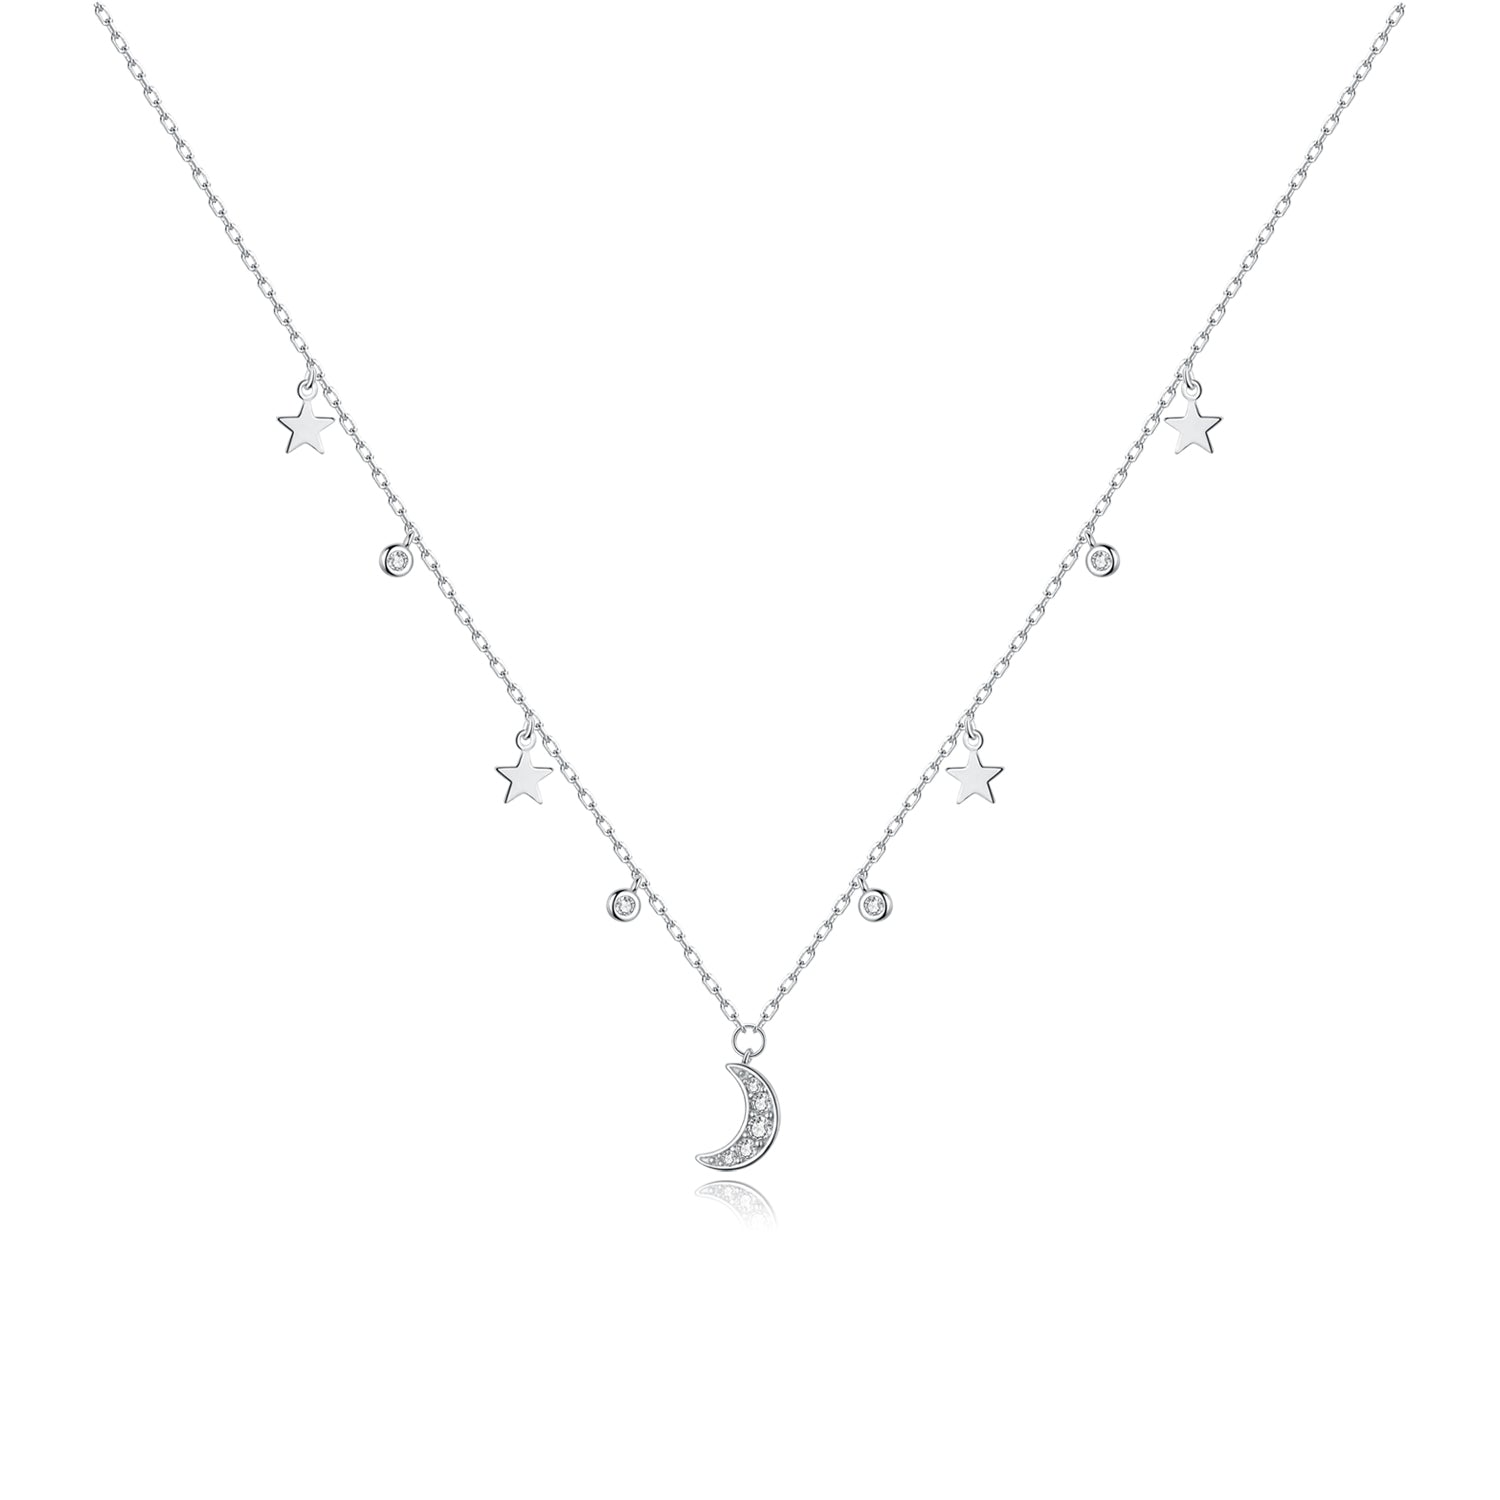 Sterling Silver Crescent Moon & Stars Hypoallergenic Necklace